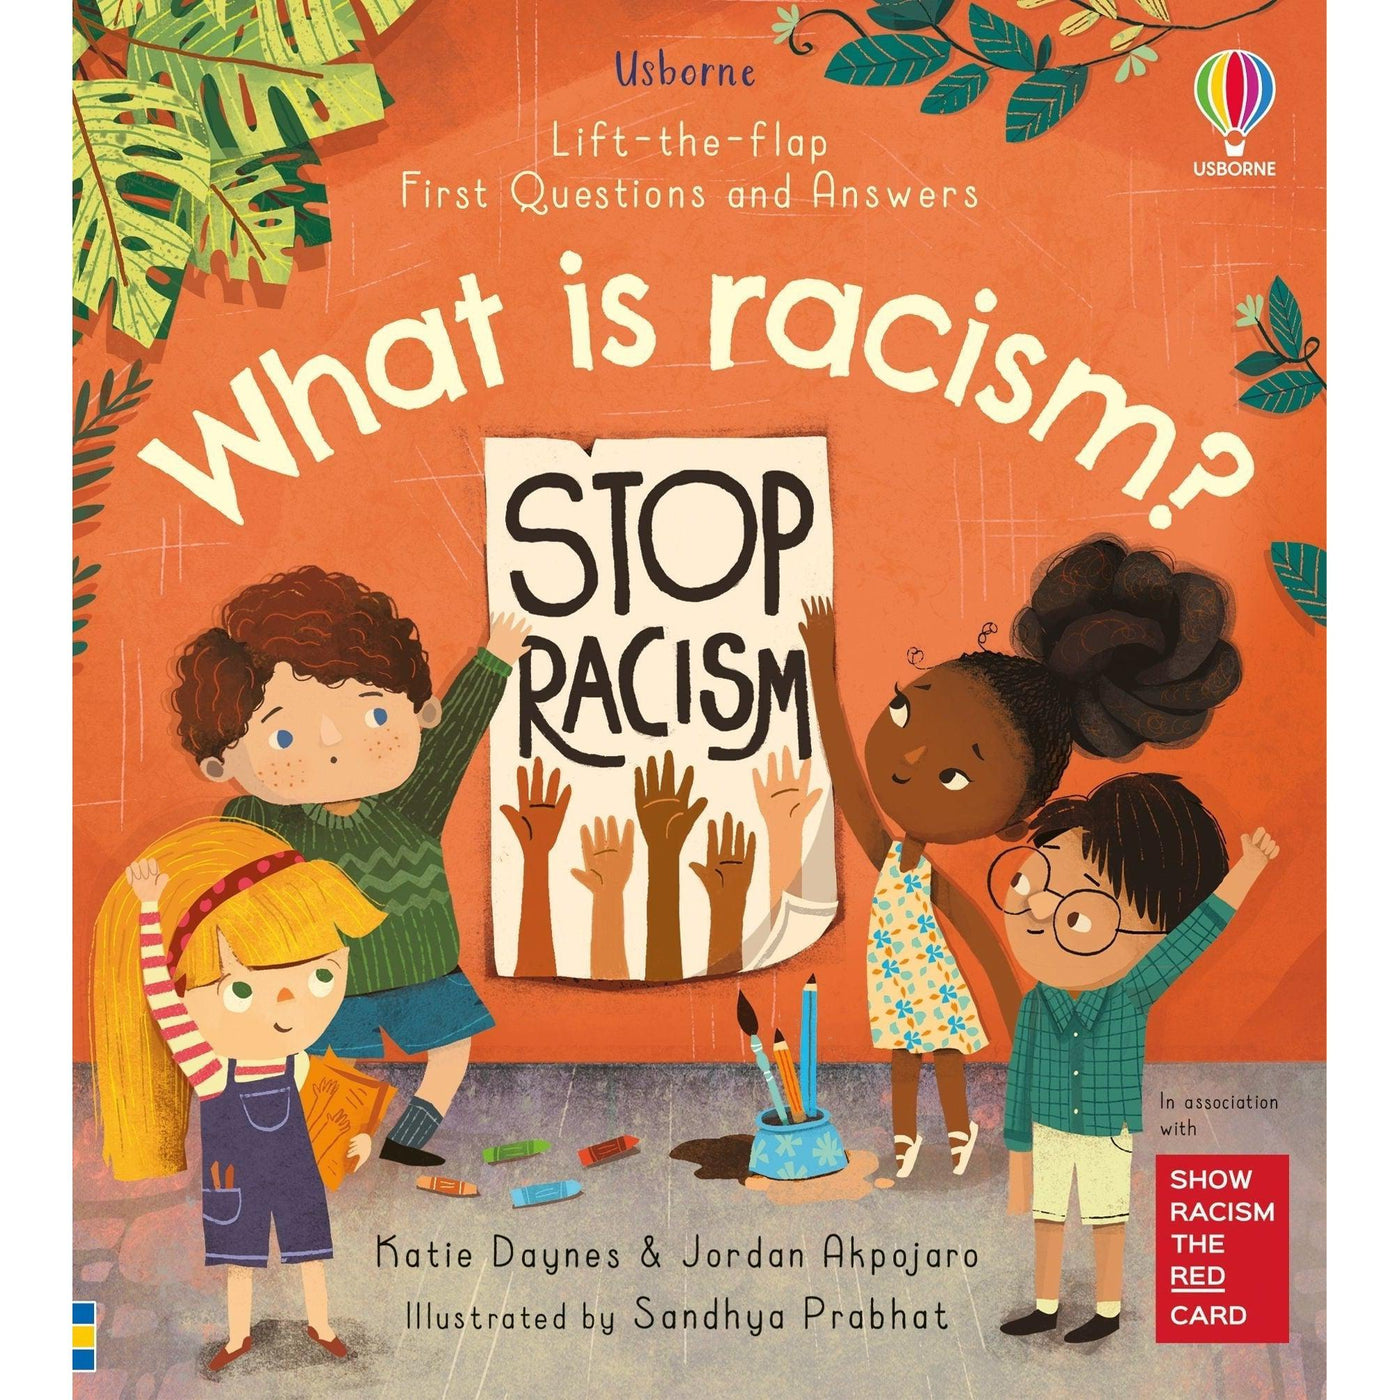 First Questions And Answers: What Is Racism?